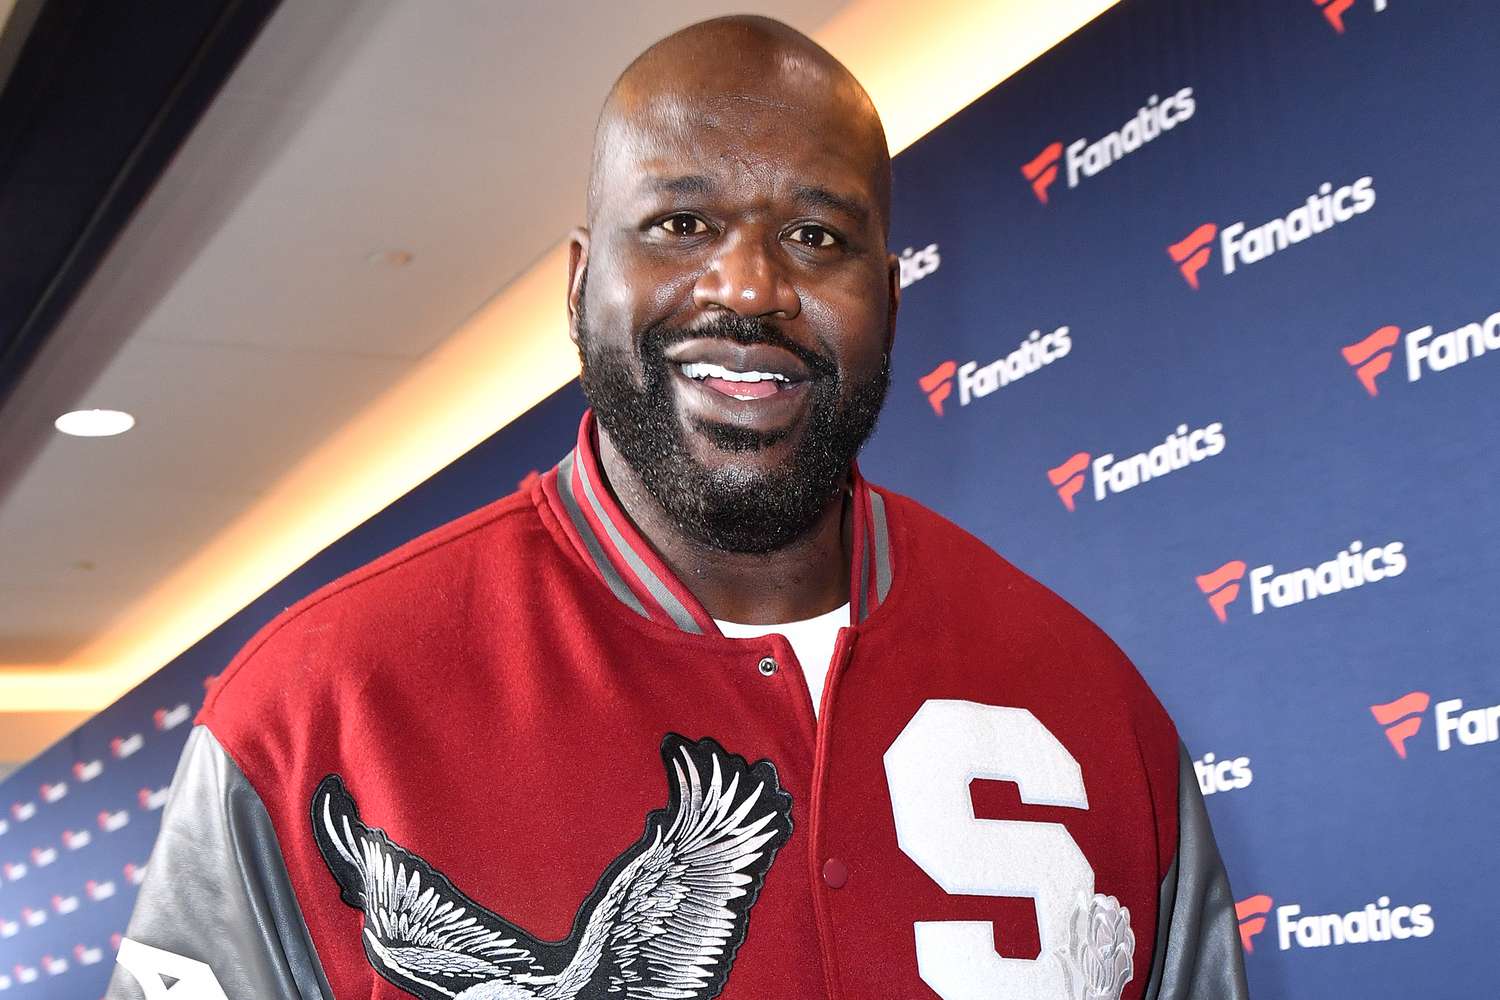 Shaquille O'Neal attends Michael Rubin's Fanatics Super Bowl party at the Marquee Dayclub at The Cosmopolitan of Las Vegas on February 10, 2024